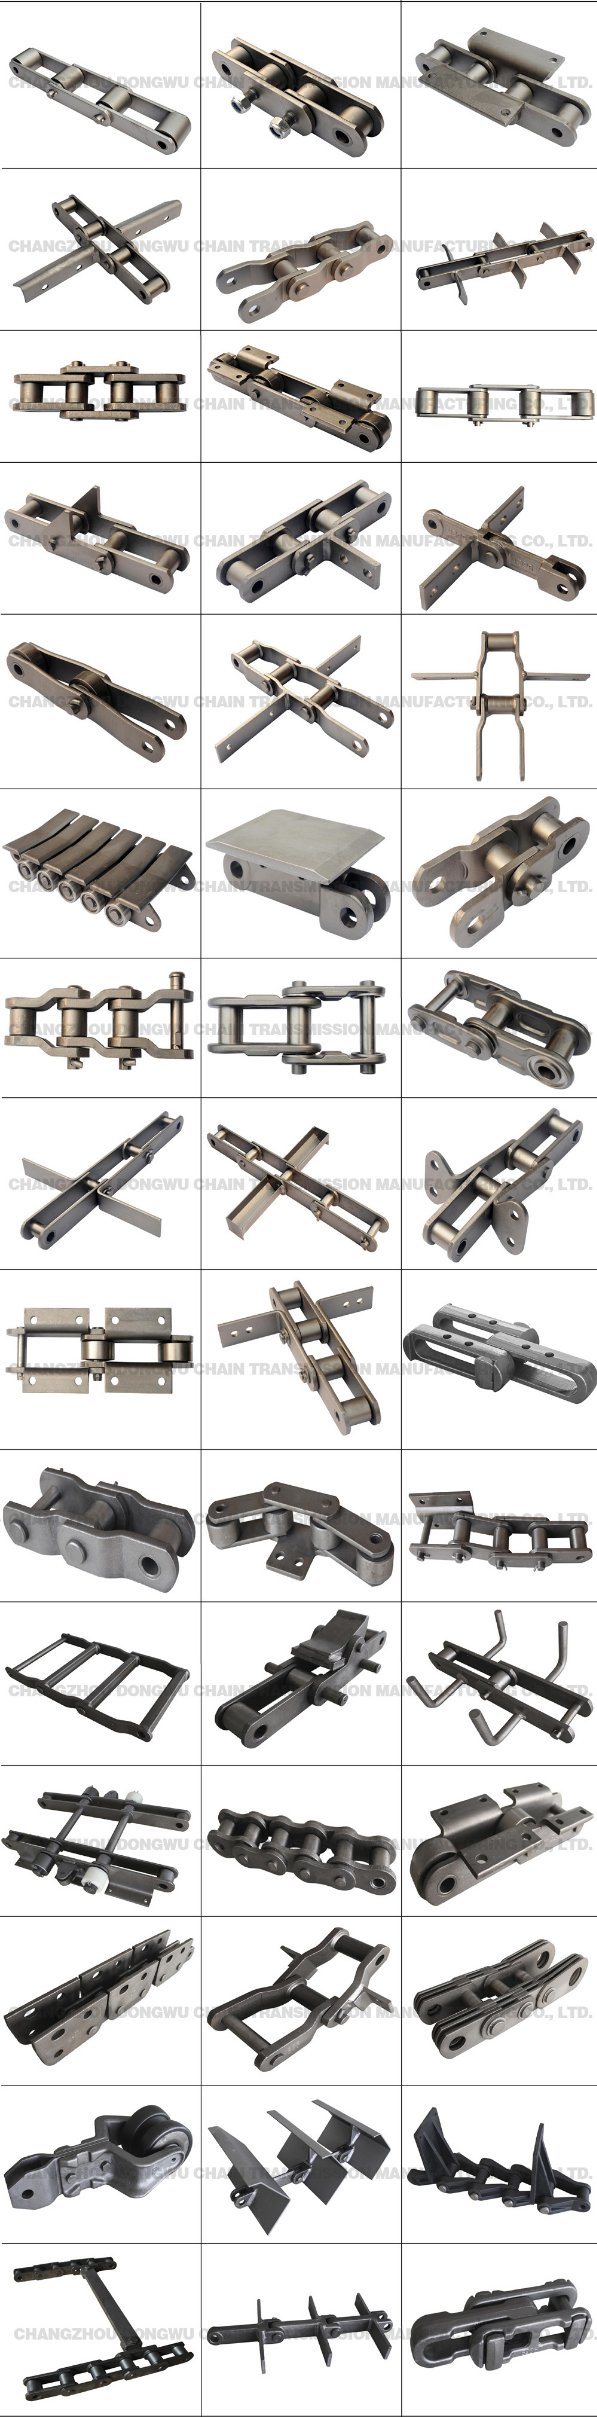 Steel Transmission Standard Roller Chain for Pipe Wrench